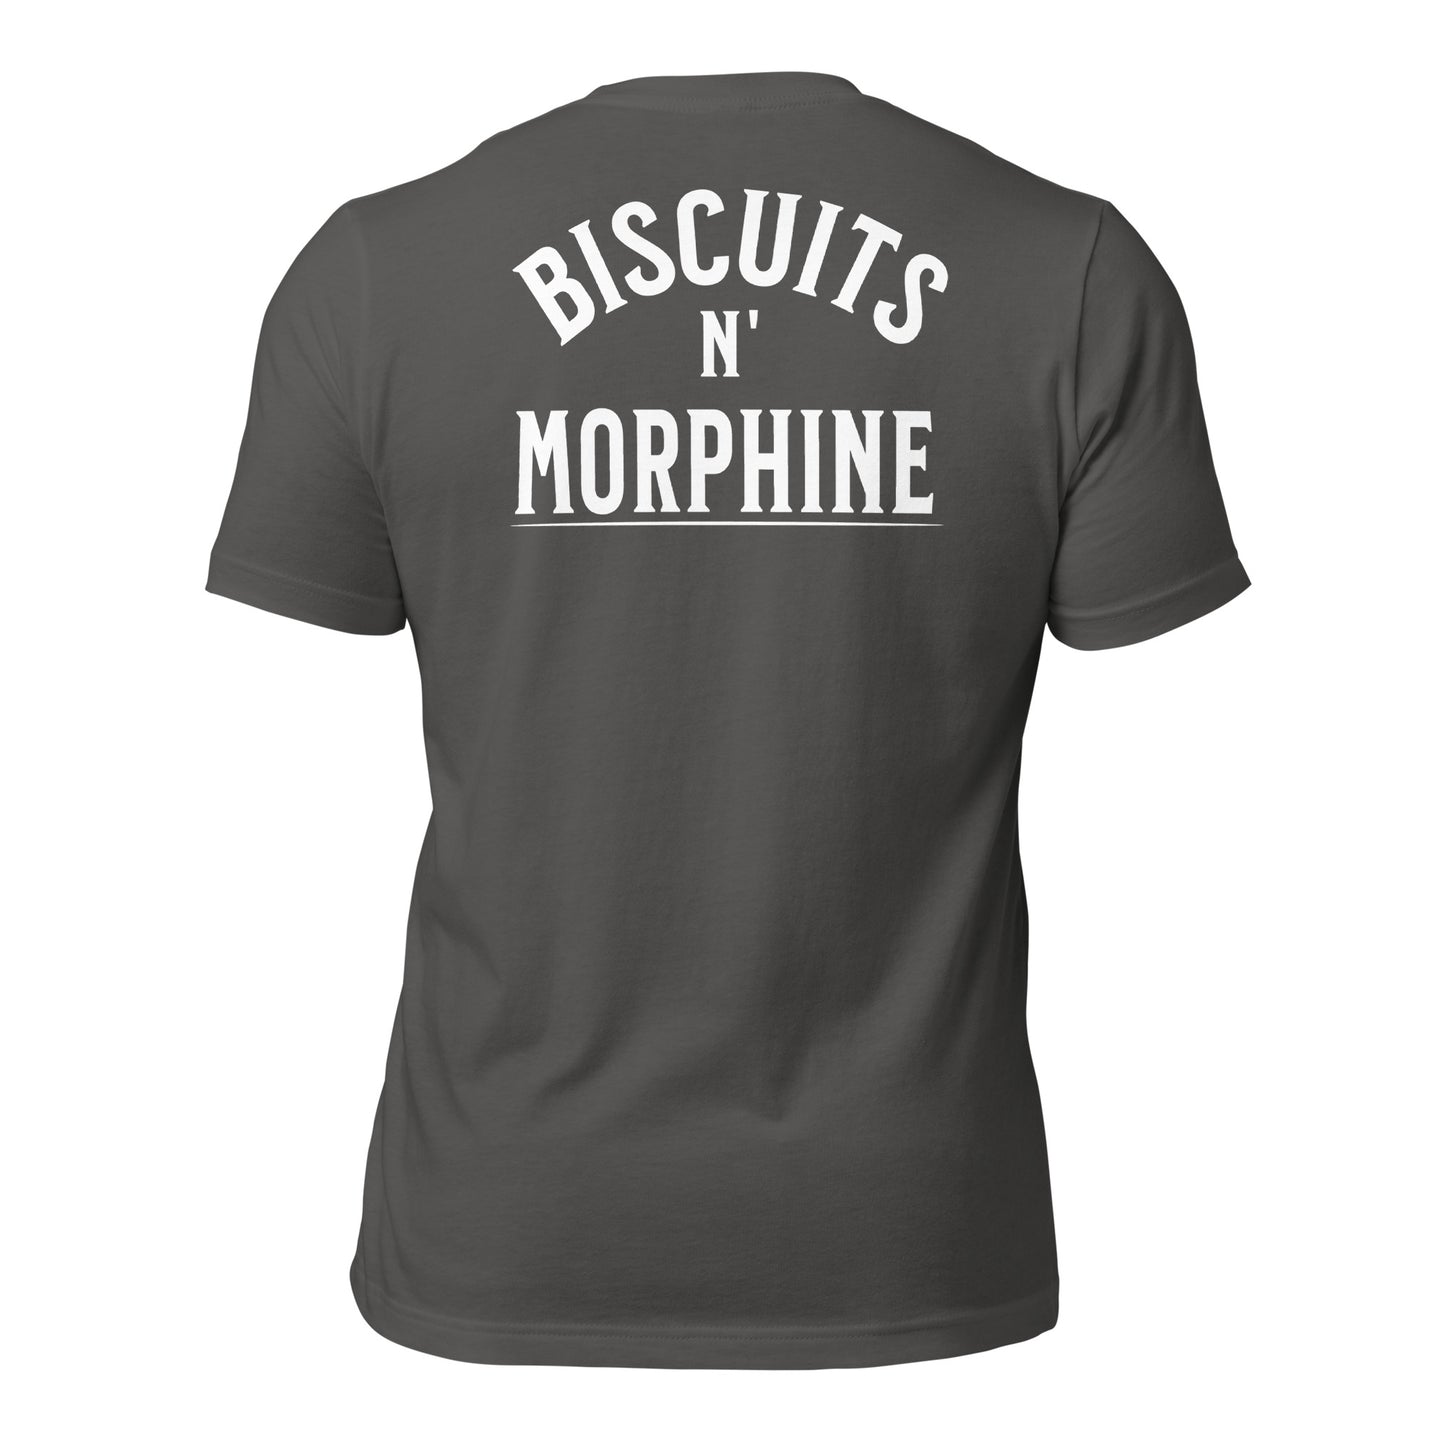 Biscuits N' Morphine